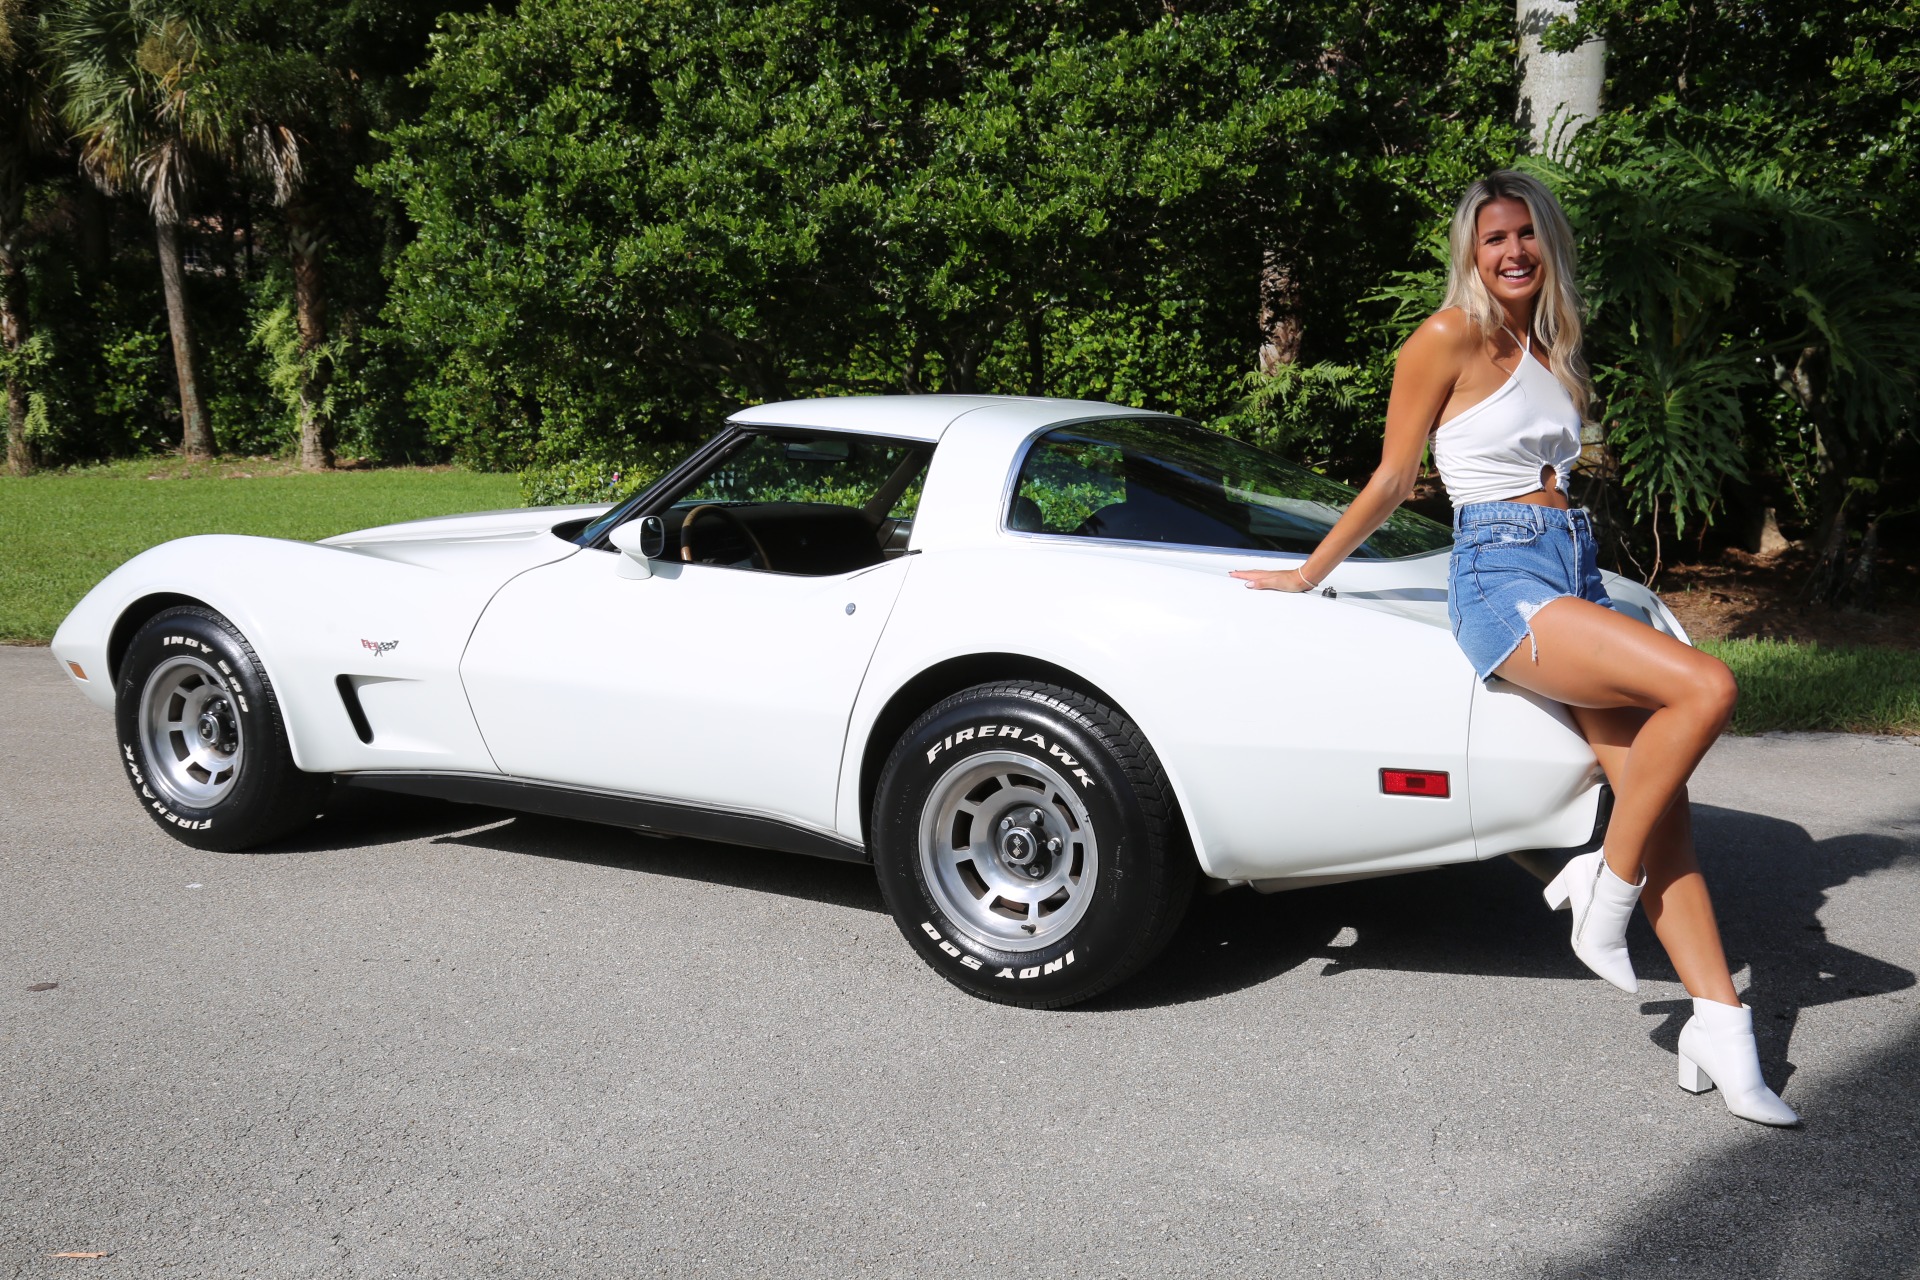 Used 1978 Chevrolet Corvette Anniversary Edition for sale Sold at Muscle Cars for Sale Inc. in Fort Myers FL 33912 1